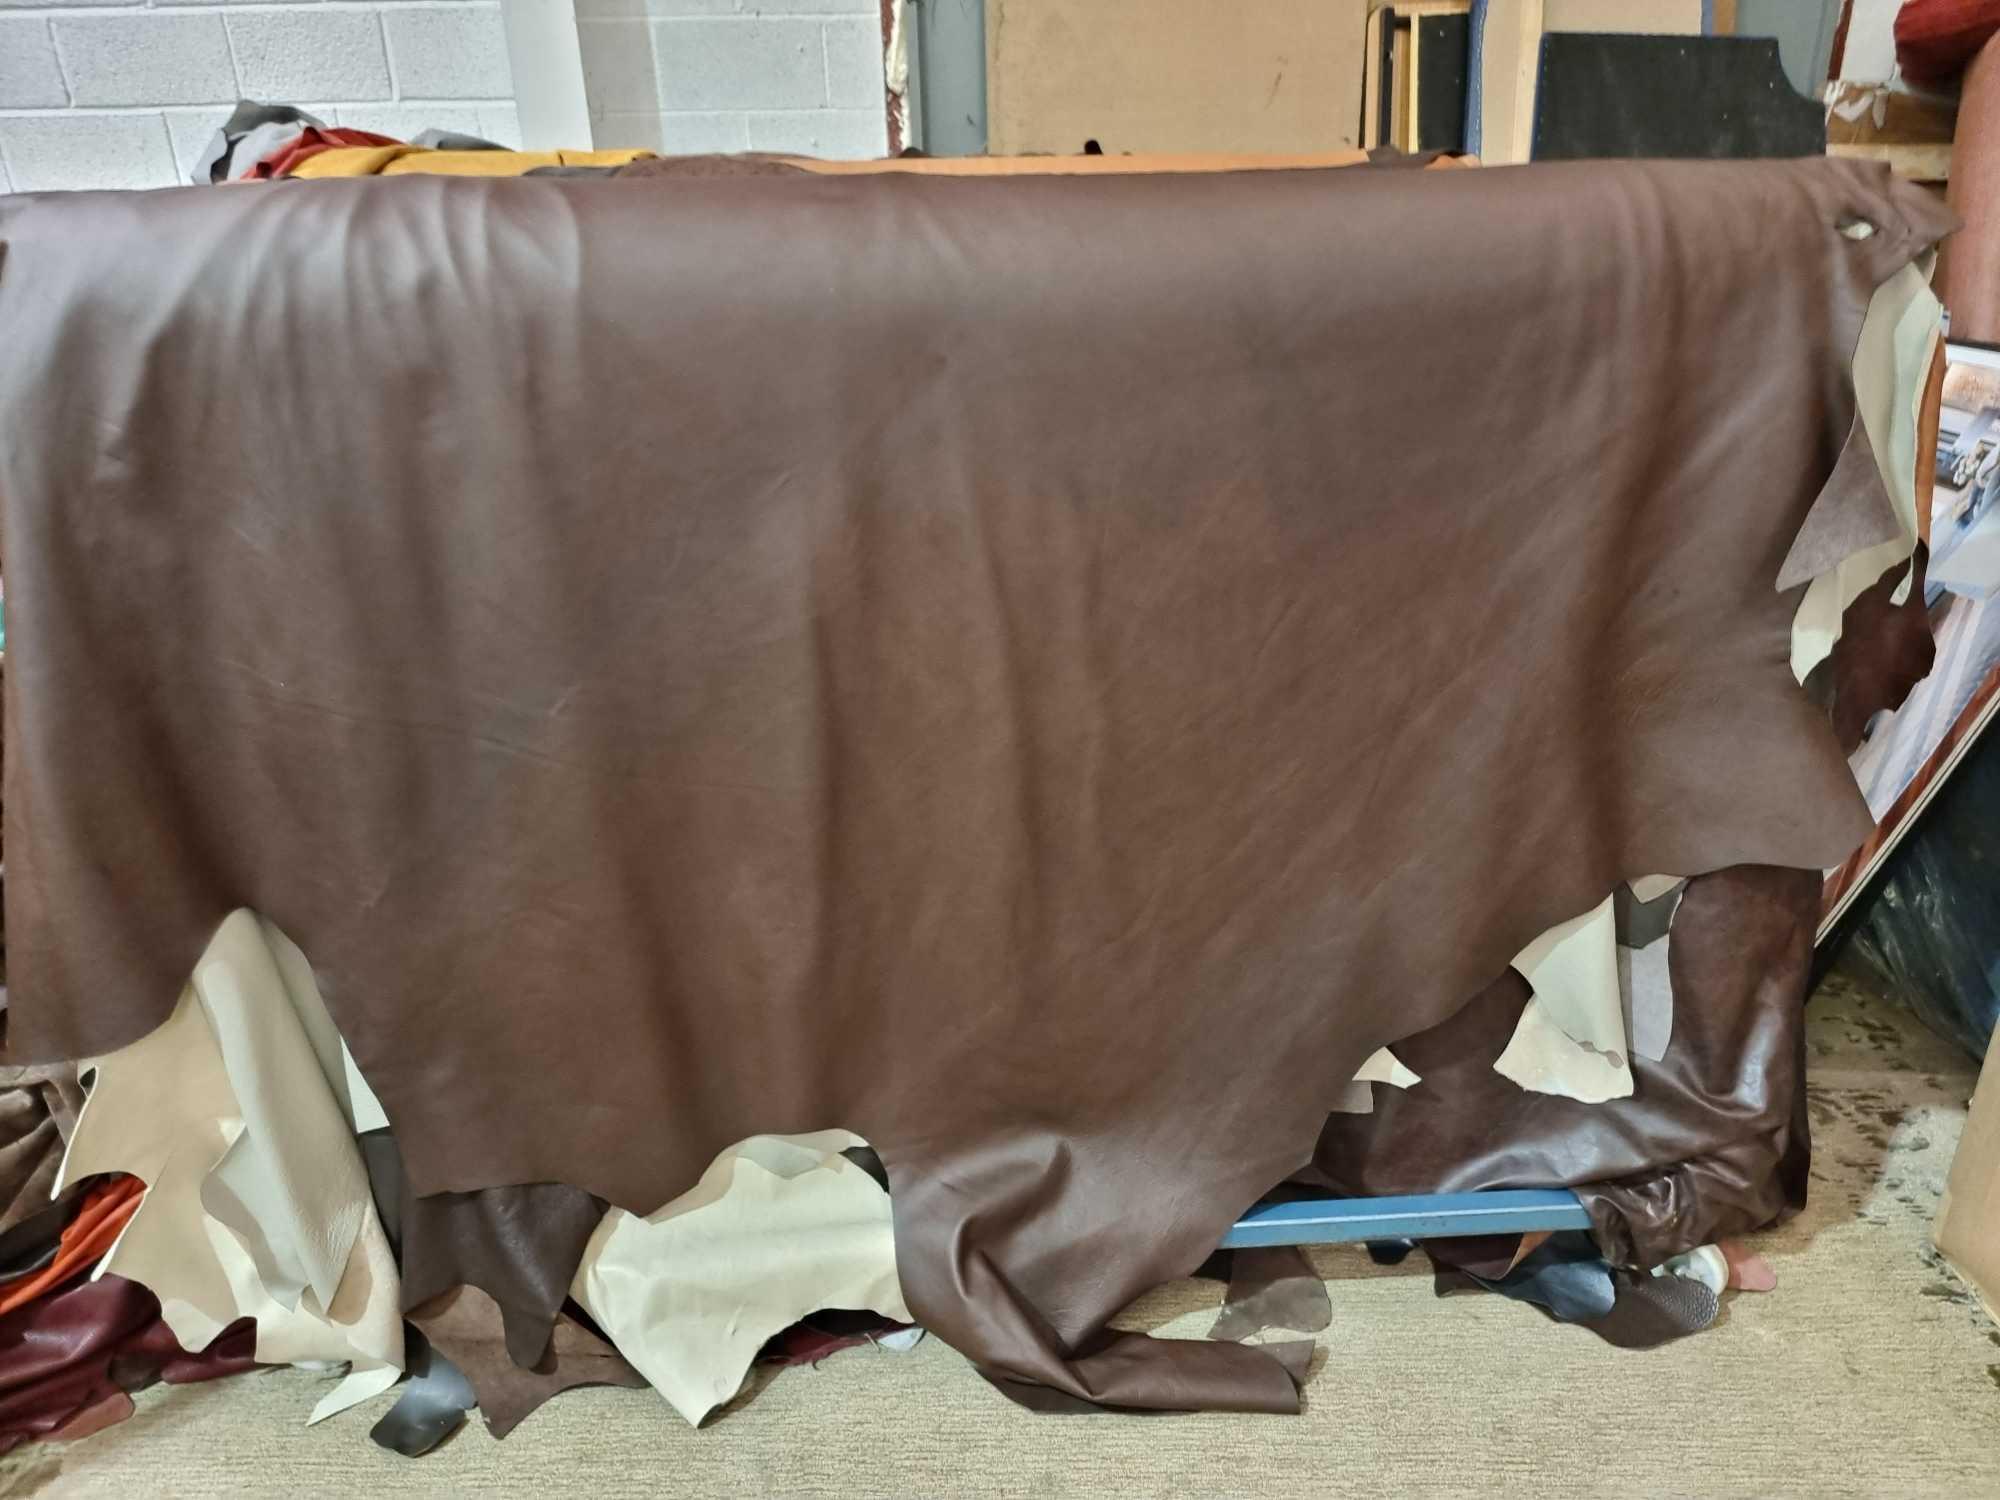 Andrew Muirhead 55857 1 AH002 Chestnut Leather Hide approximately 4 73M2 2 2 x 2 15cm ( Hide No,74)